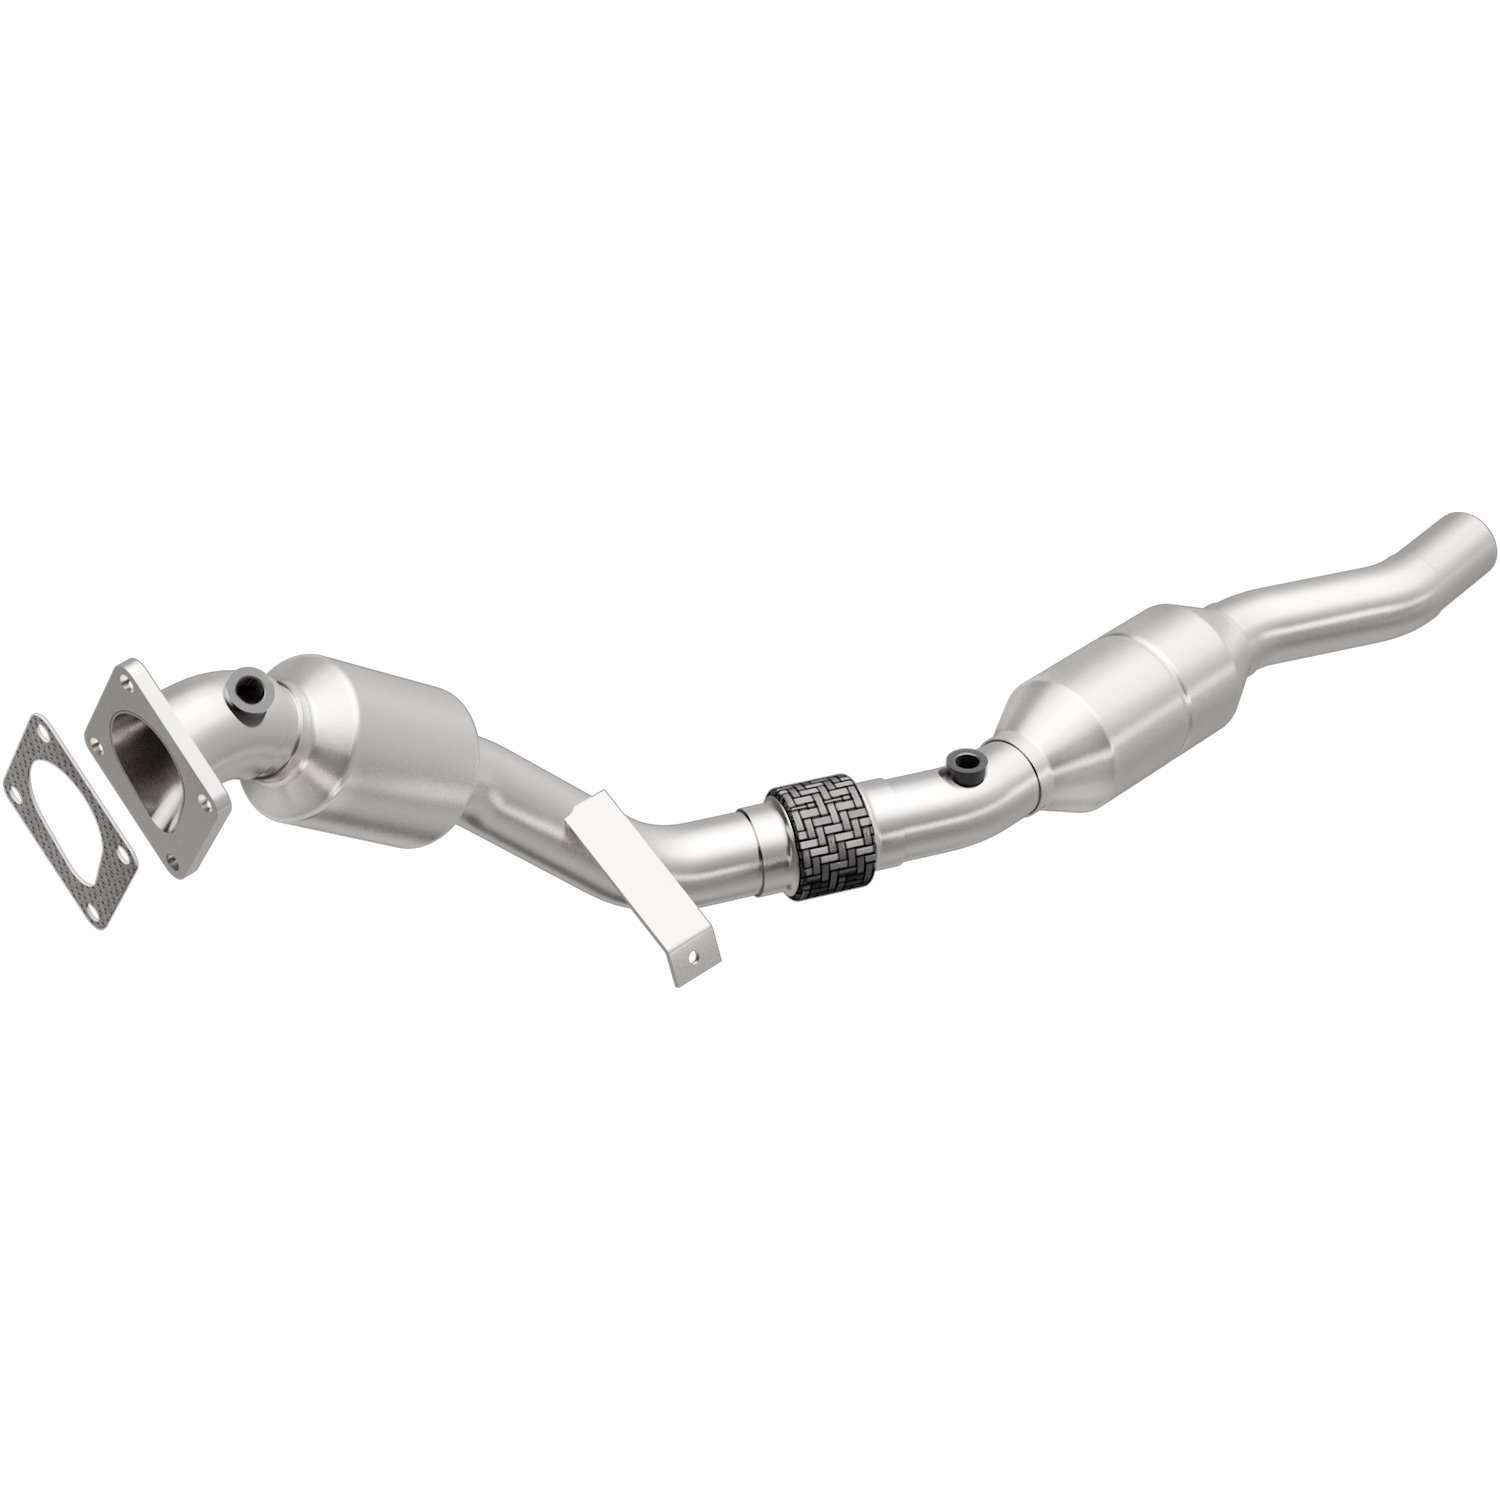 2000-2002 Audi S4 OEM Grade Federal / EPA Compliant Direct-Fit Catalytic Converter